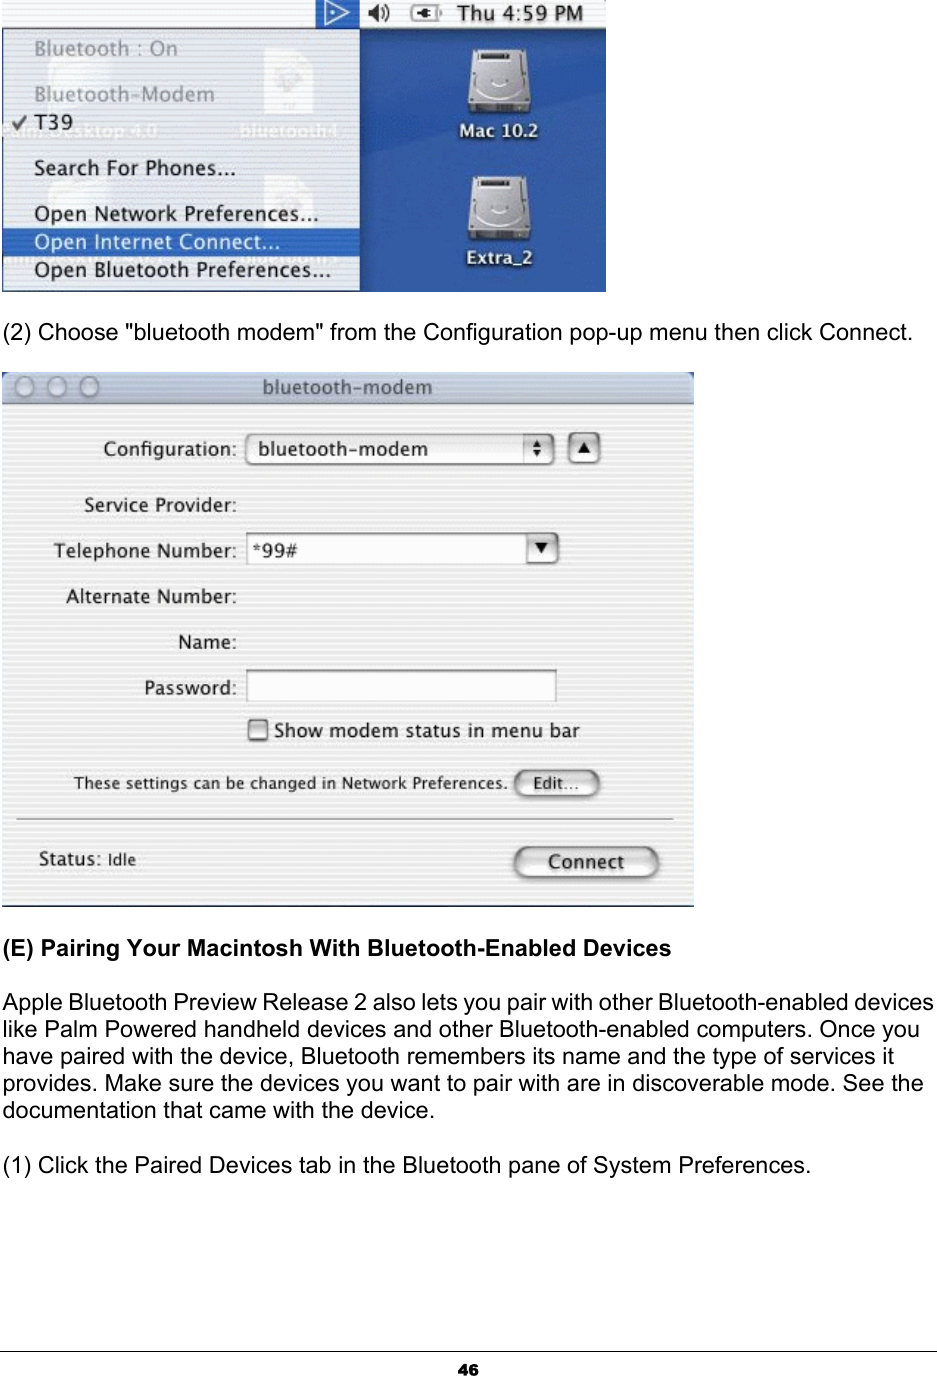  46 (2) Choose &quot;bluetooth modem&quot; from the Configuration pop-up menu then click Connect.  (E) Pairing Your Macintosh With Bluetooth-Enabled Devices   Apple Bluetooth Preview Release 2 also lets you pair with other Bluetooth-enabled devices like Palm Powered handheld devices and other Bluetooth-enabled computers. Once you have paired with the device, Bluetooth remembers its name and the type of services it provides. Make sure the devices you want to pair with are in discoverable mode. See the documentation that came with the device.   (1) Click the Paired Devices tab in the Bluetooth pane of System Preferences. 